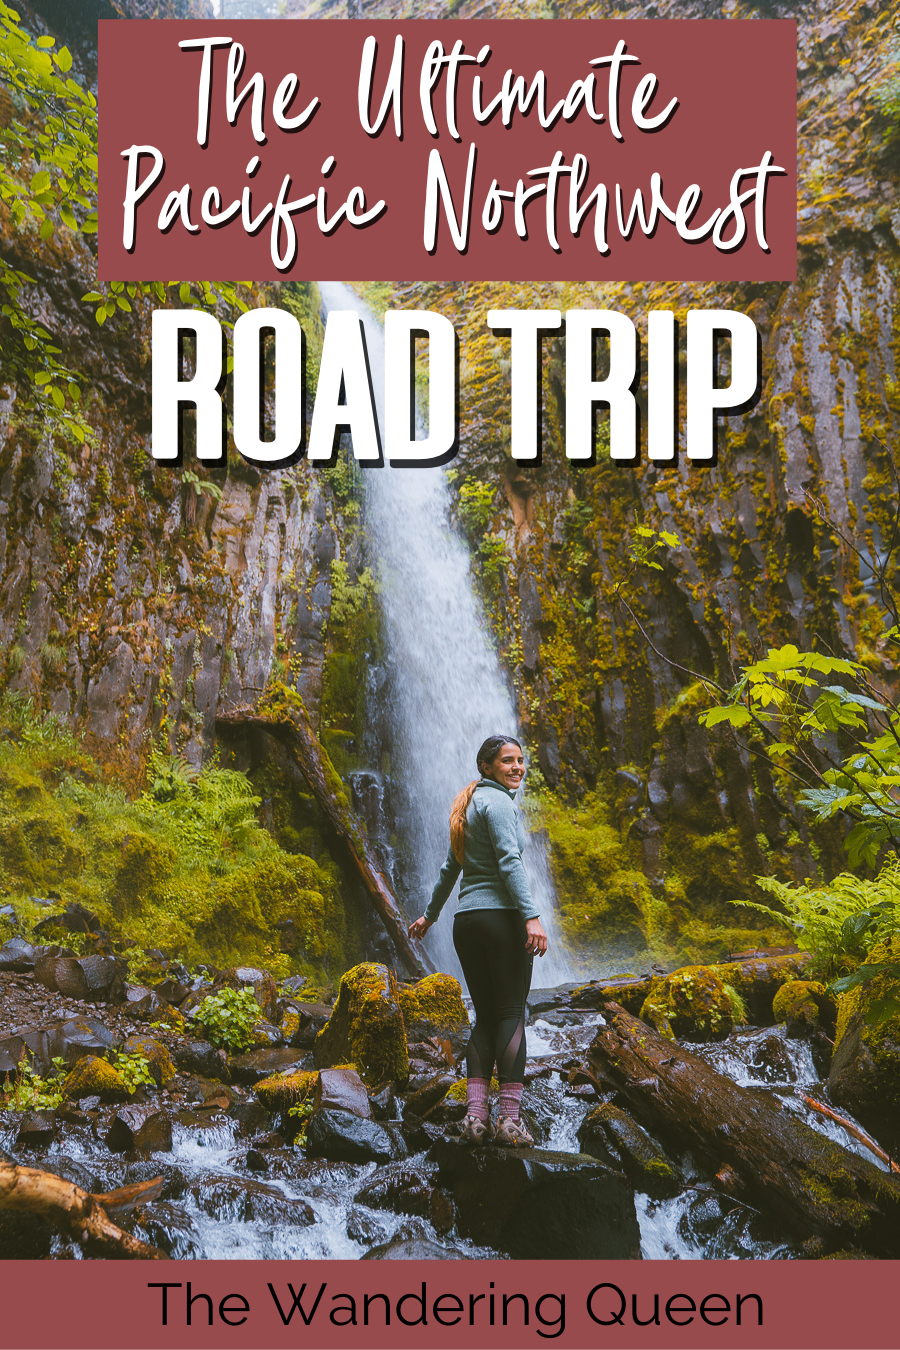 Pacific Northwest Road Trip Itinerary